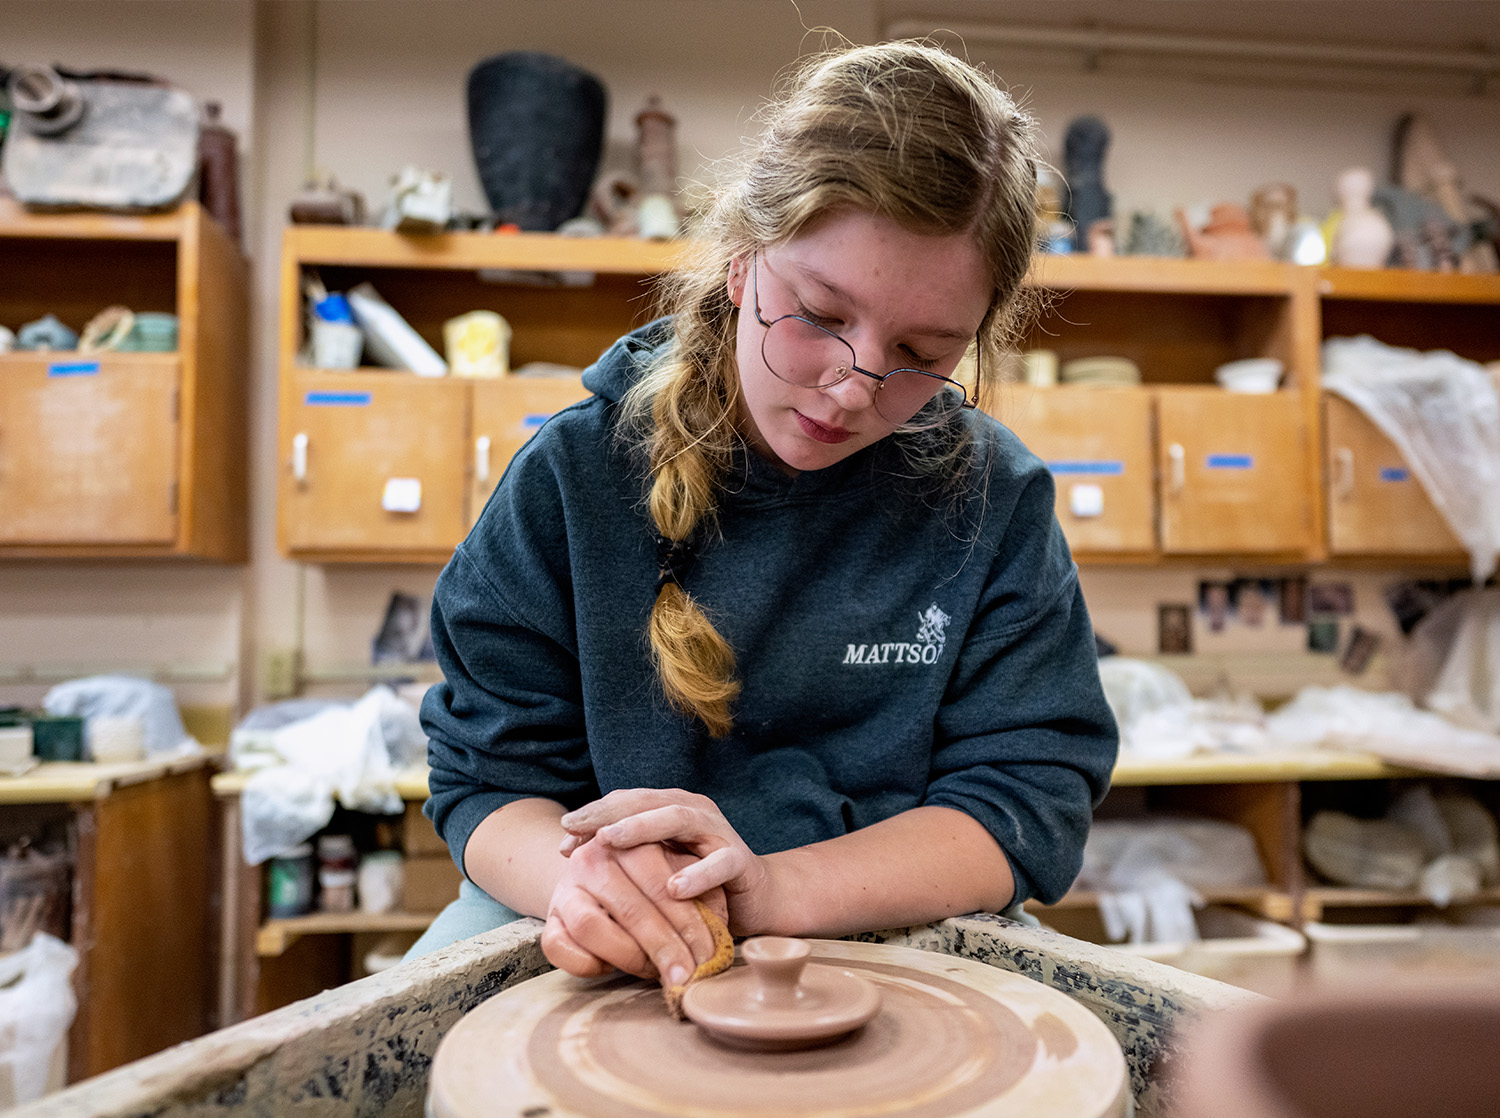 A female student sits at a pottery wheel working on a ceramic piece